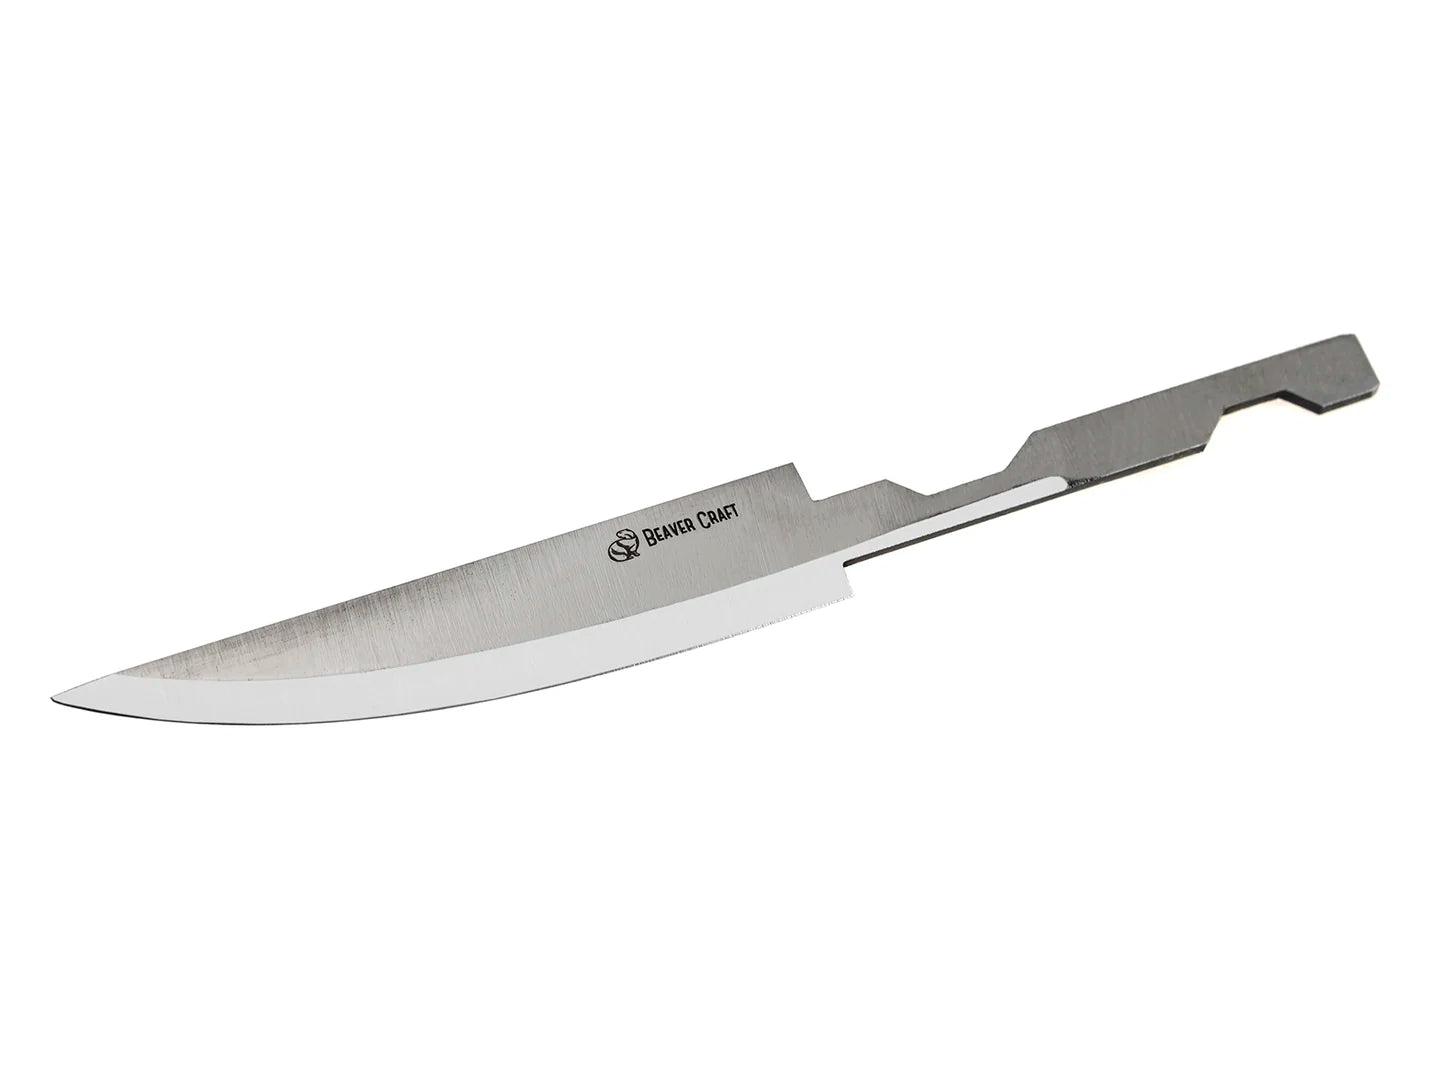 Beaver Craft BC4 - Blade for Whittling Knife - The Spoon Crank